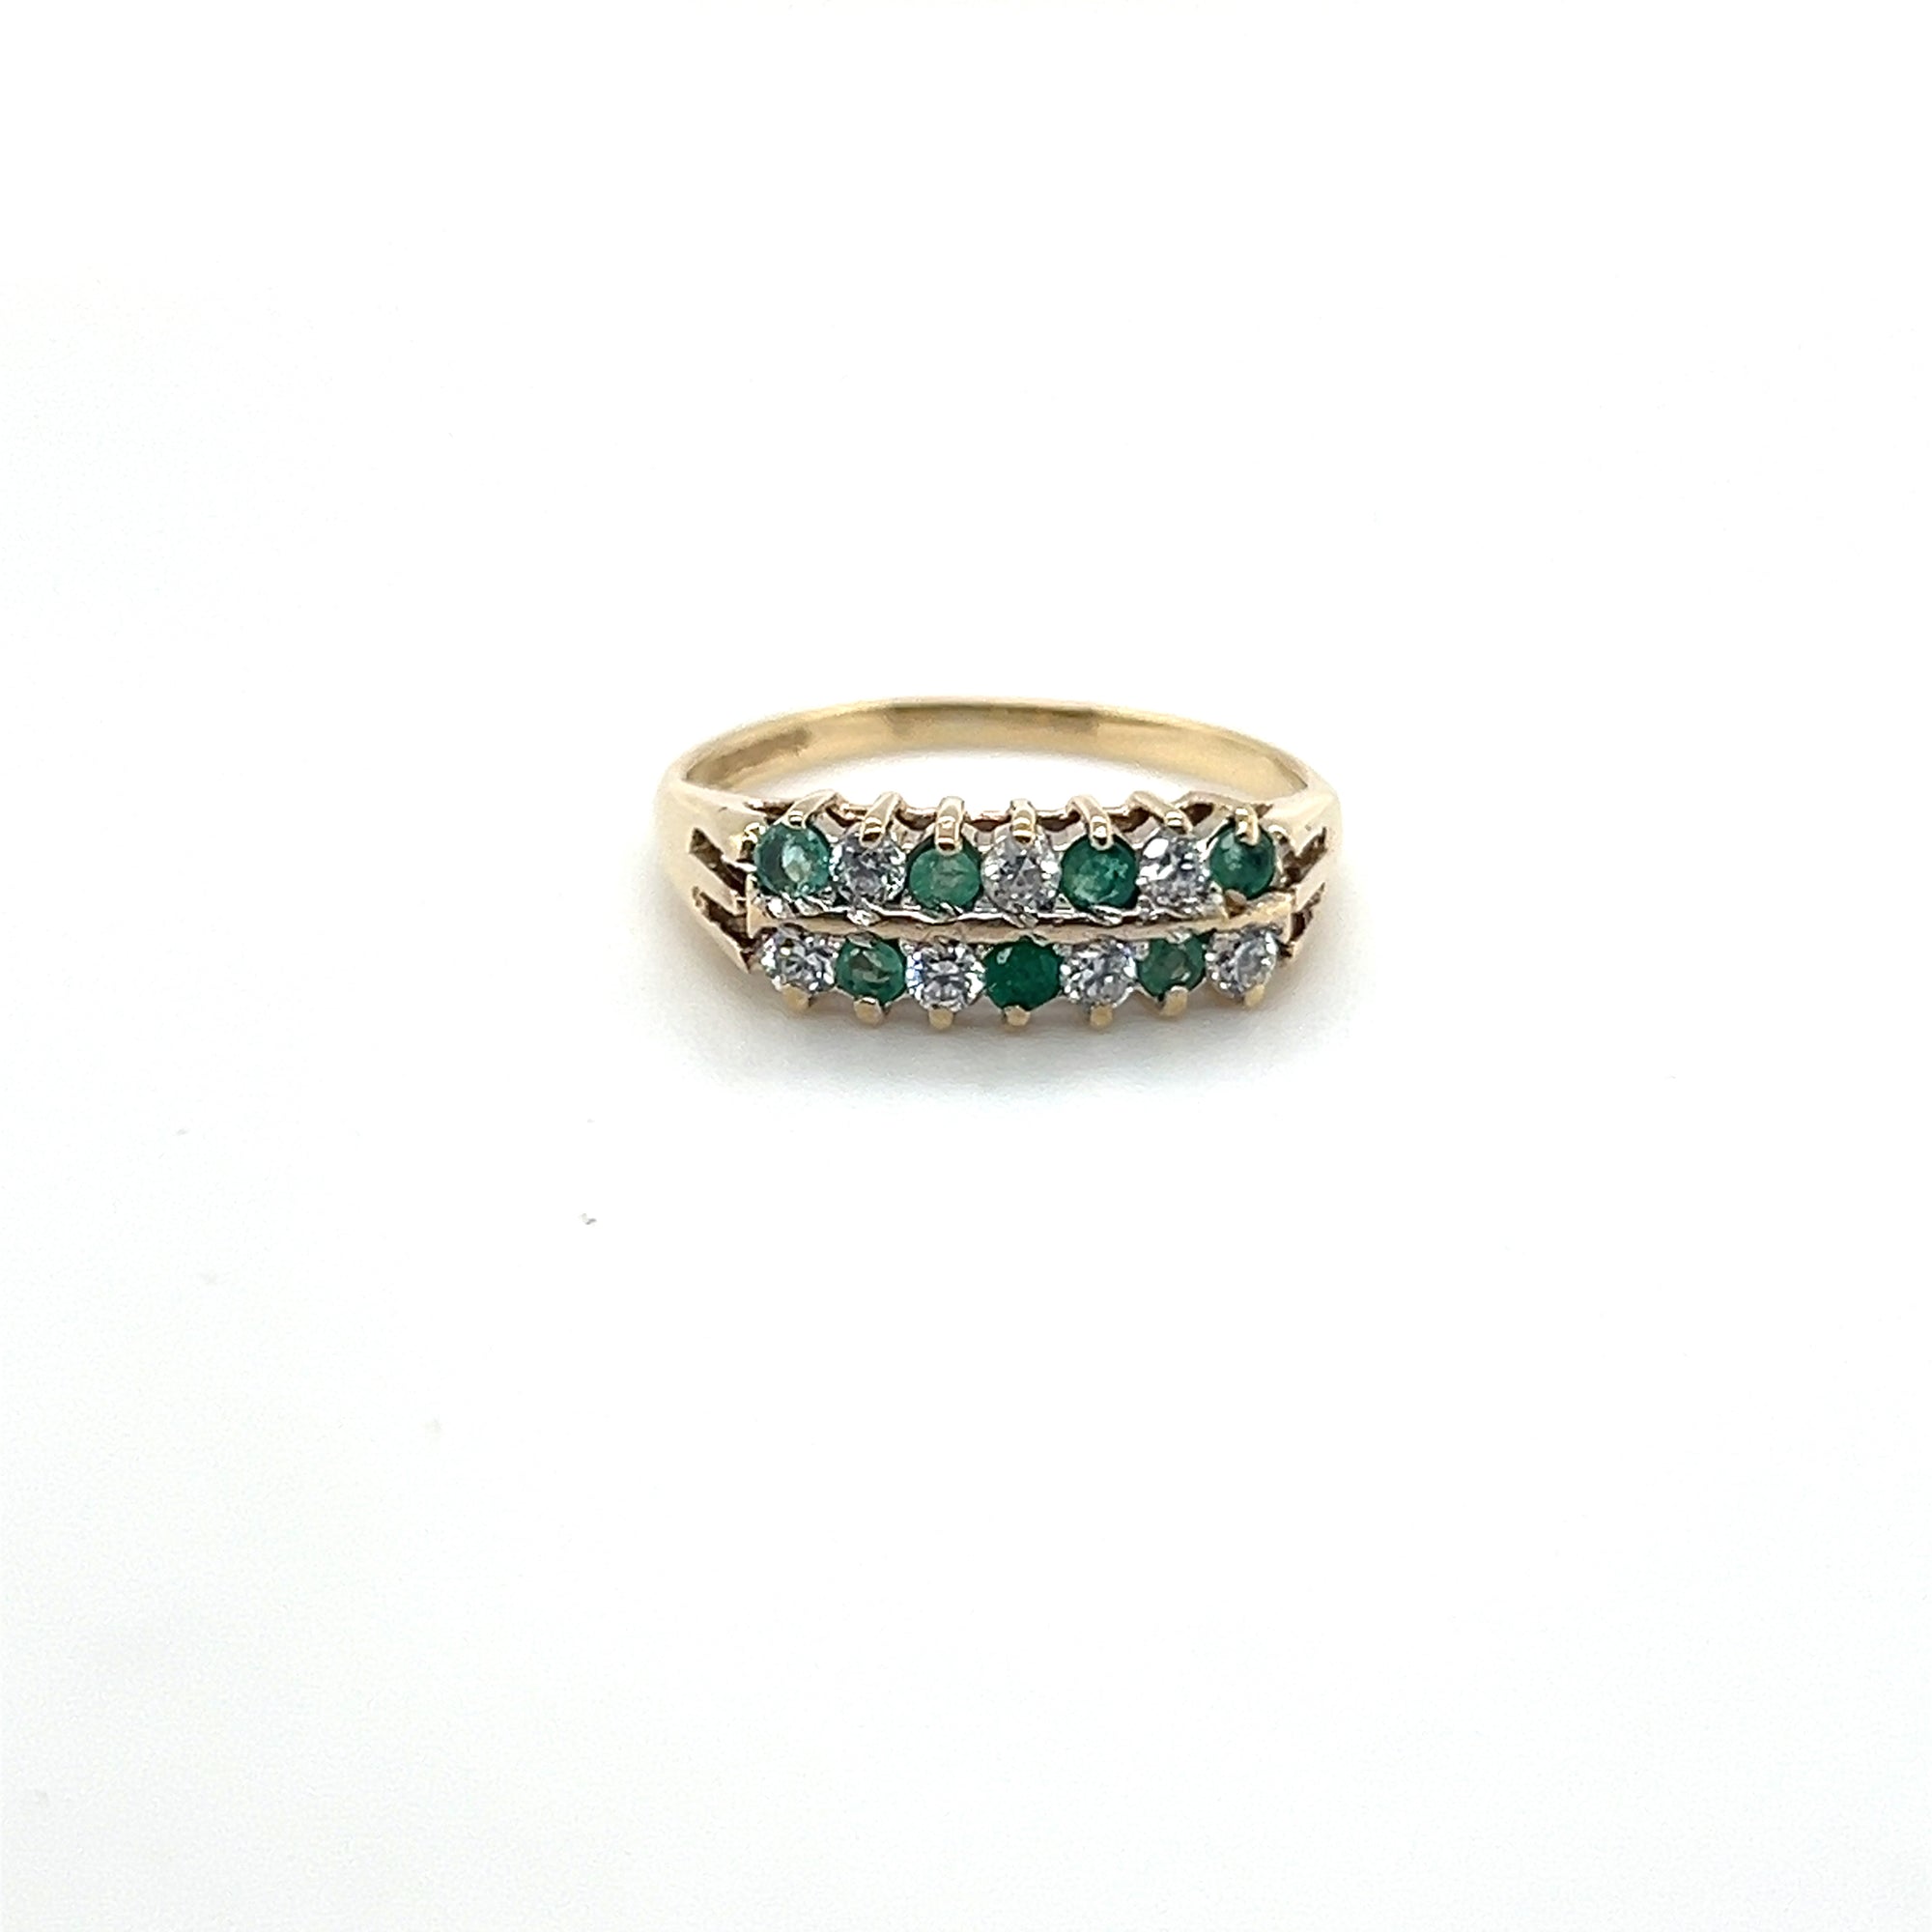 Vintage Round Emerlad and Diaomd 9ct Dress Ring